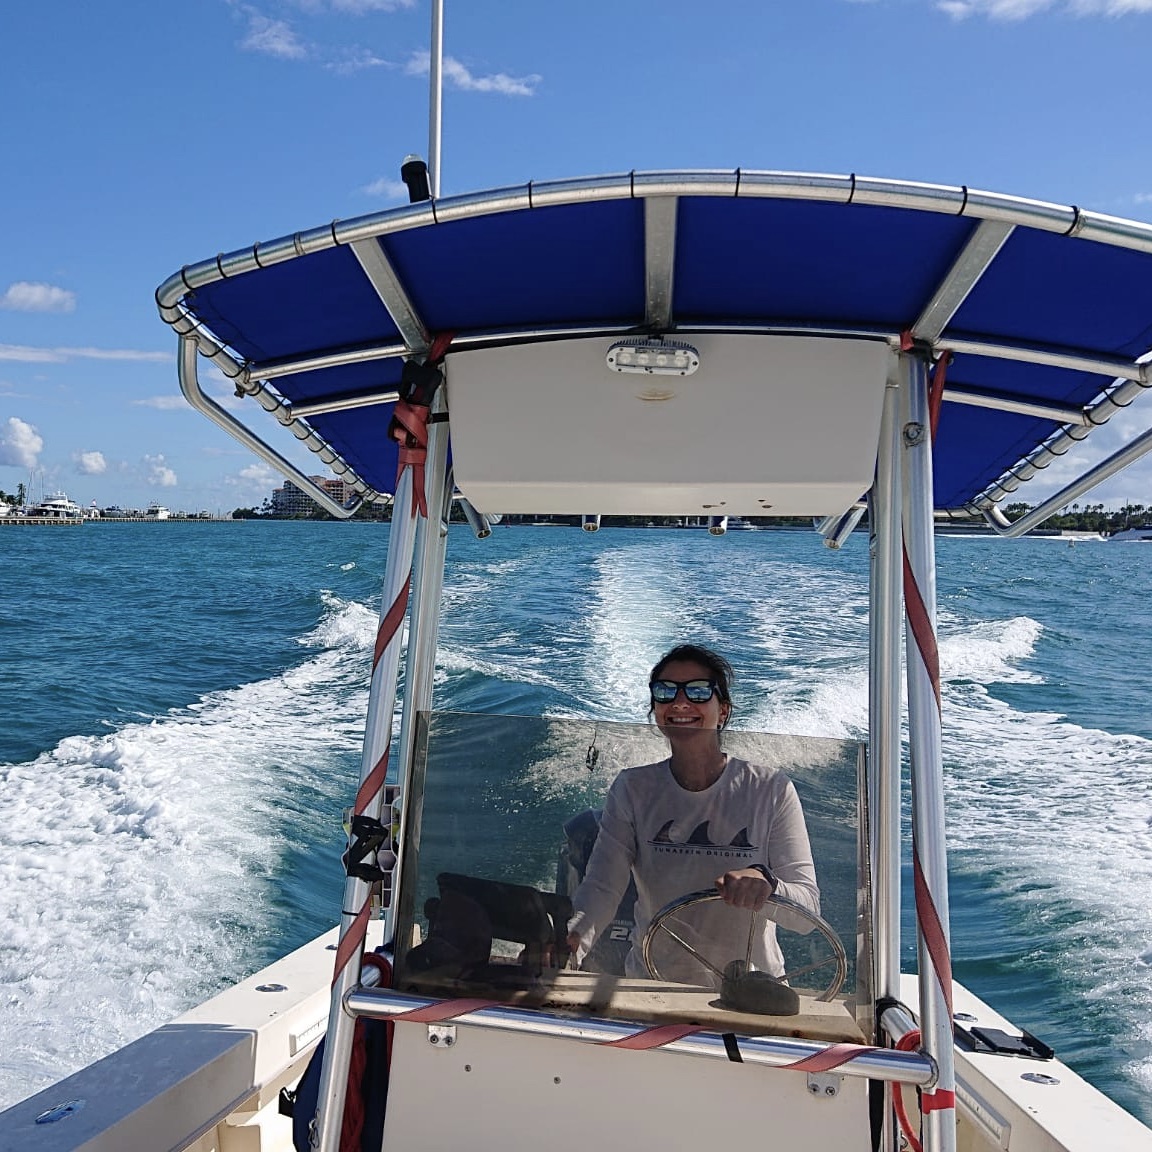 Smiling as we pass by Miami Beach on our way to our study site. PC: Kirk Gastrich